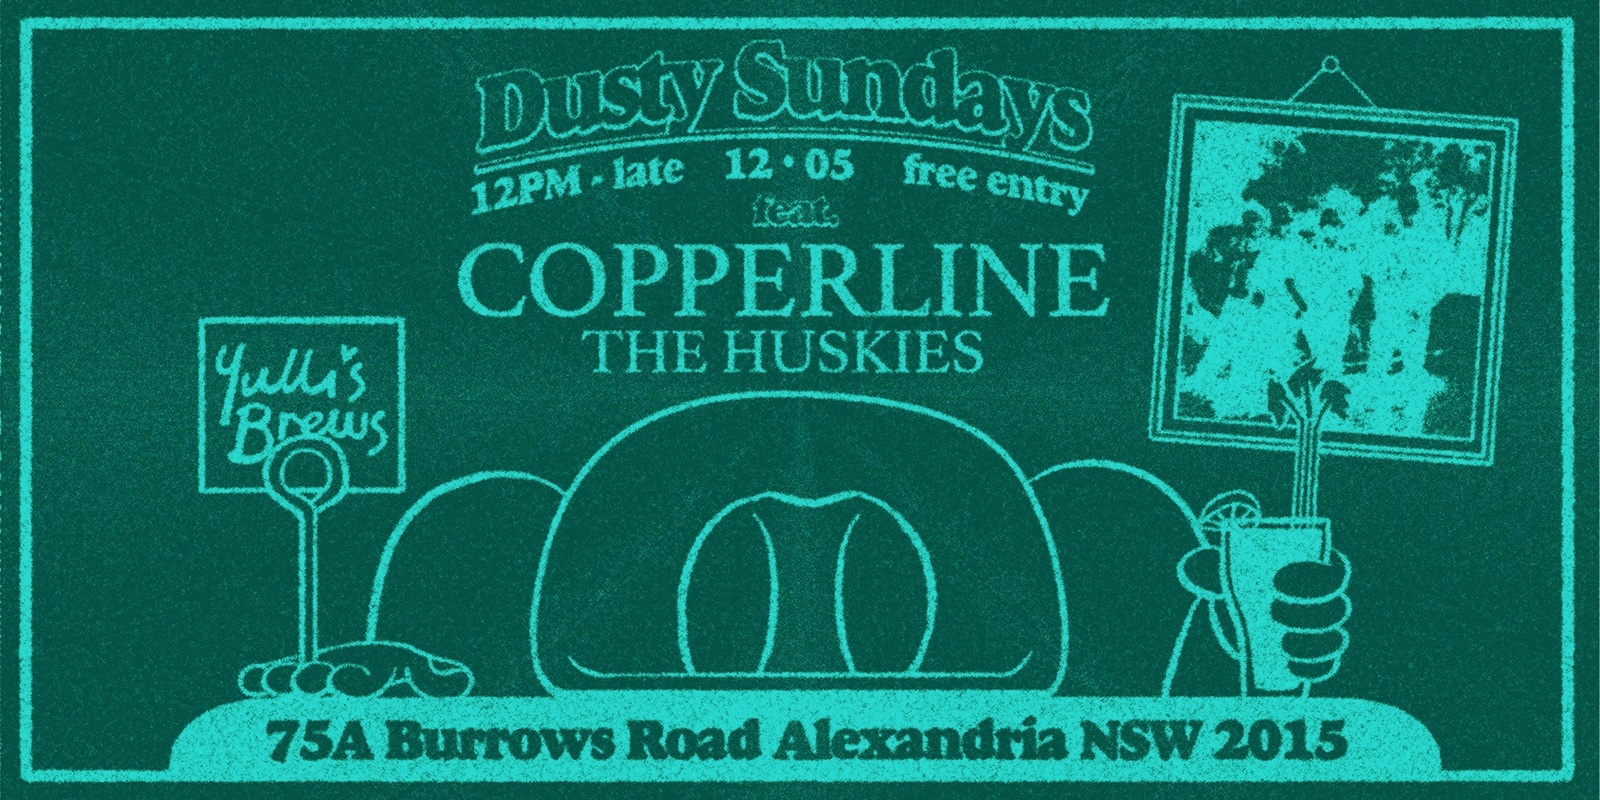 Banner image for DUSTY SUNDAYS - Copperline & The Huskies 